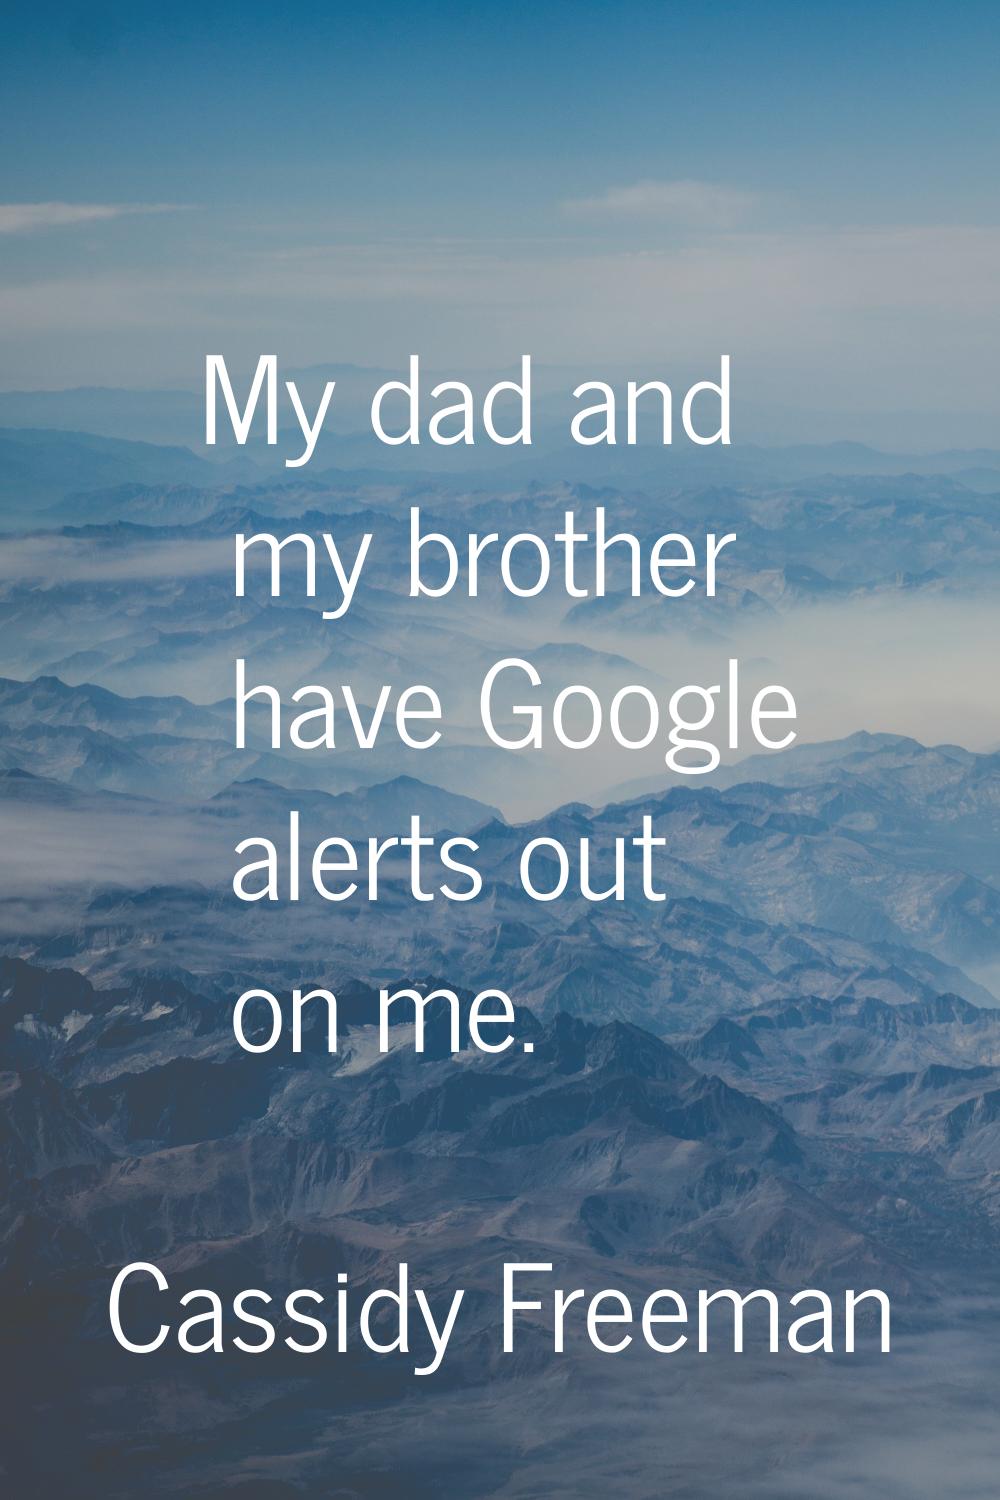 My dad and my brother have Google alerts out on me.